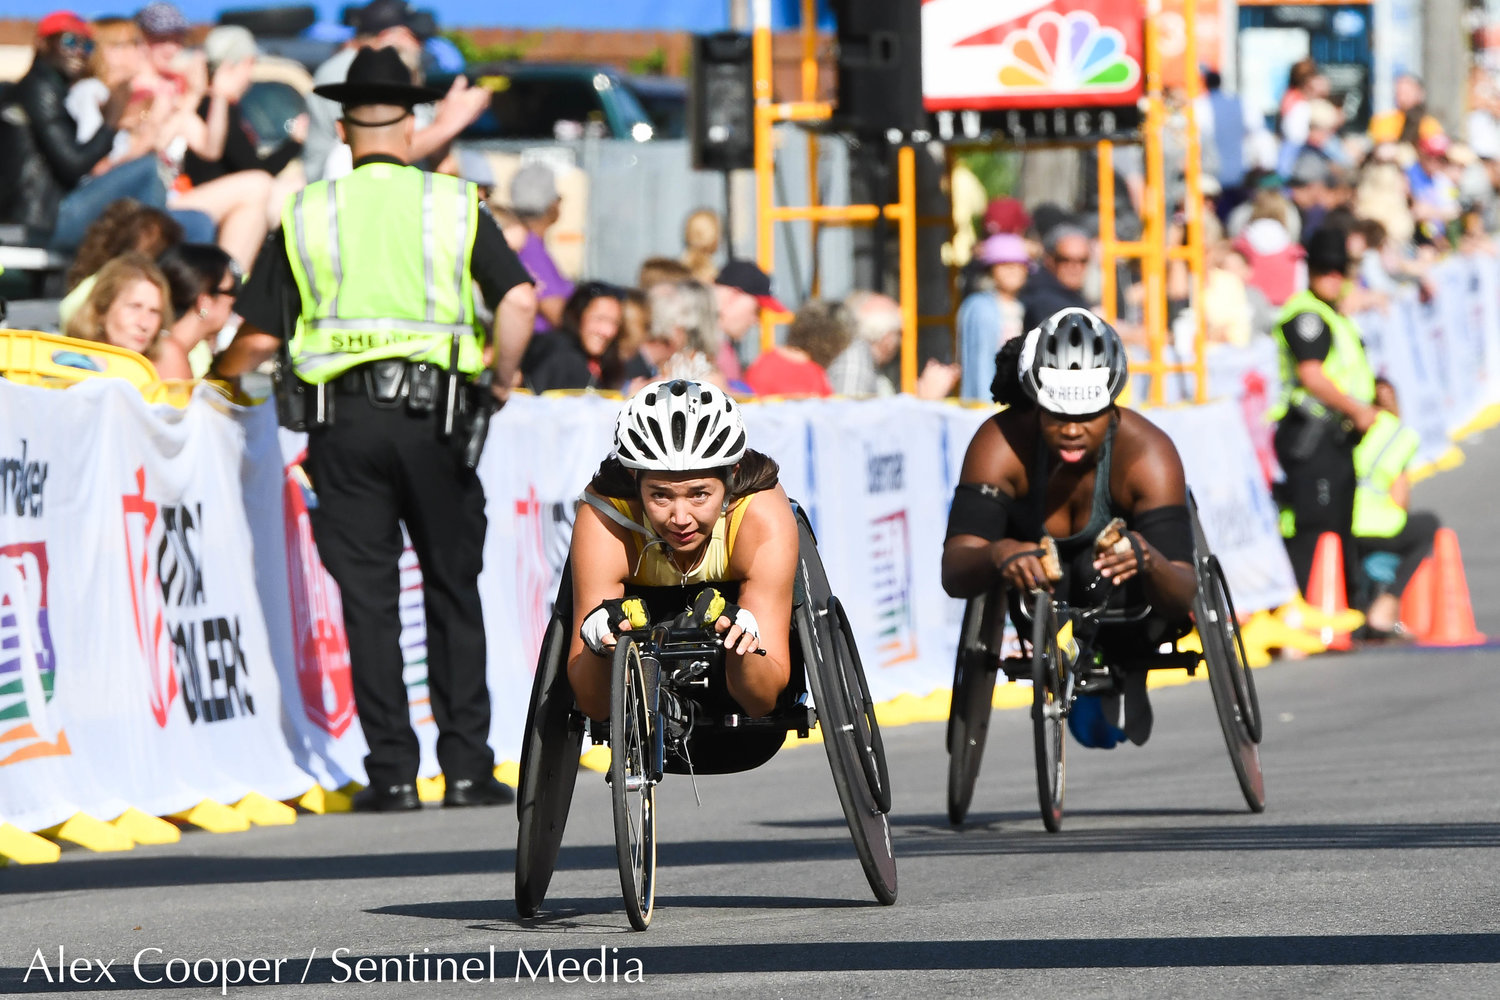 Wheelchair racers cross the finish line during the 45th Boilermaker Road Race on Sunday.